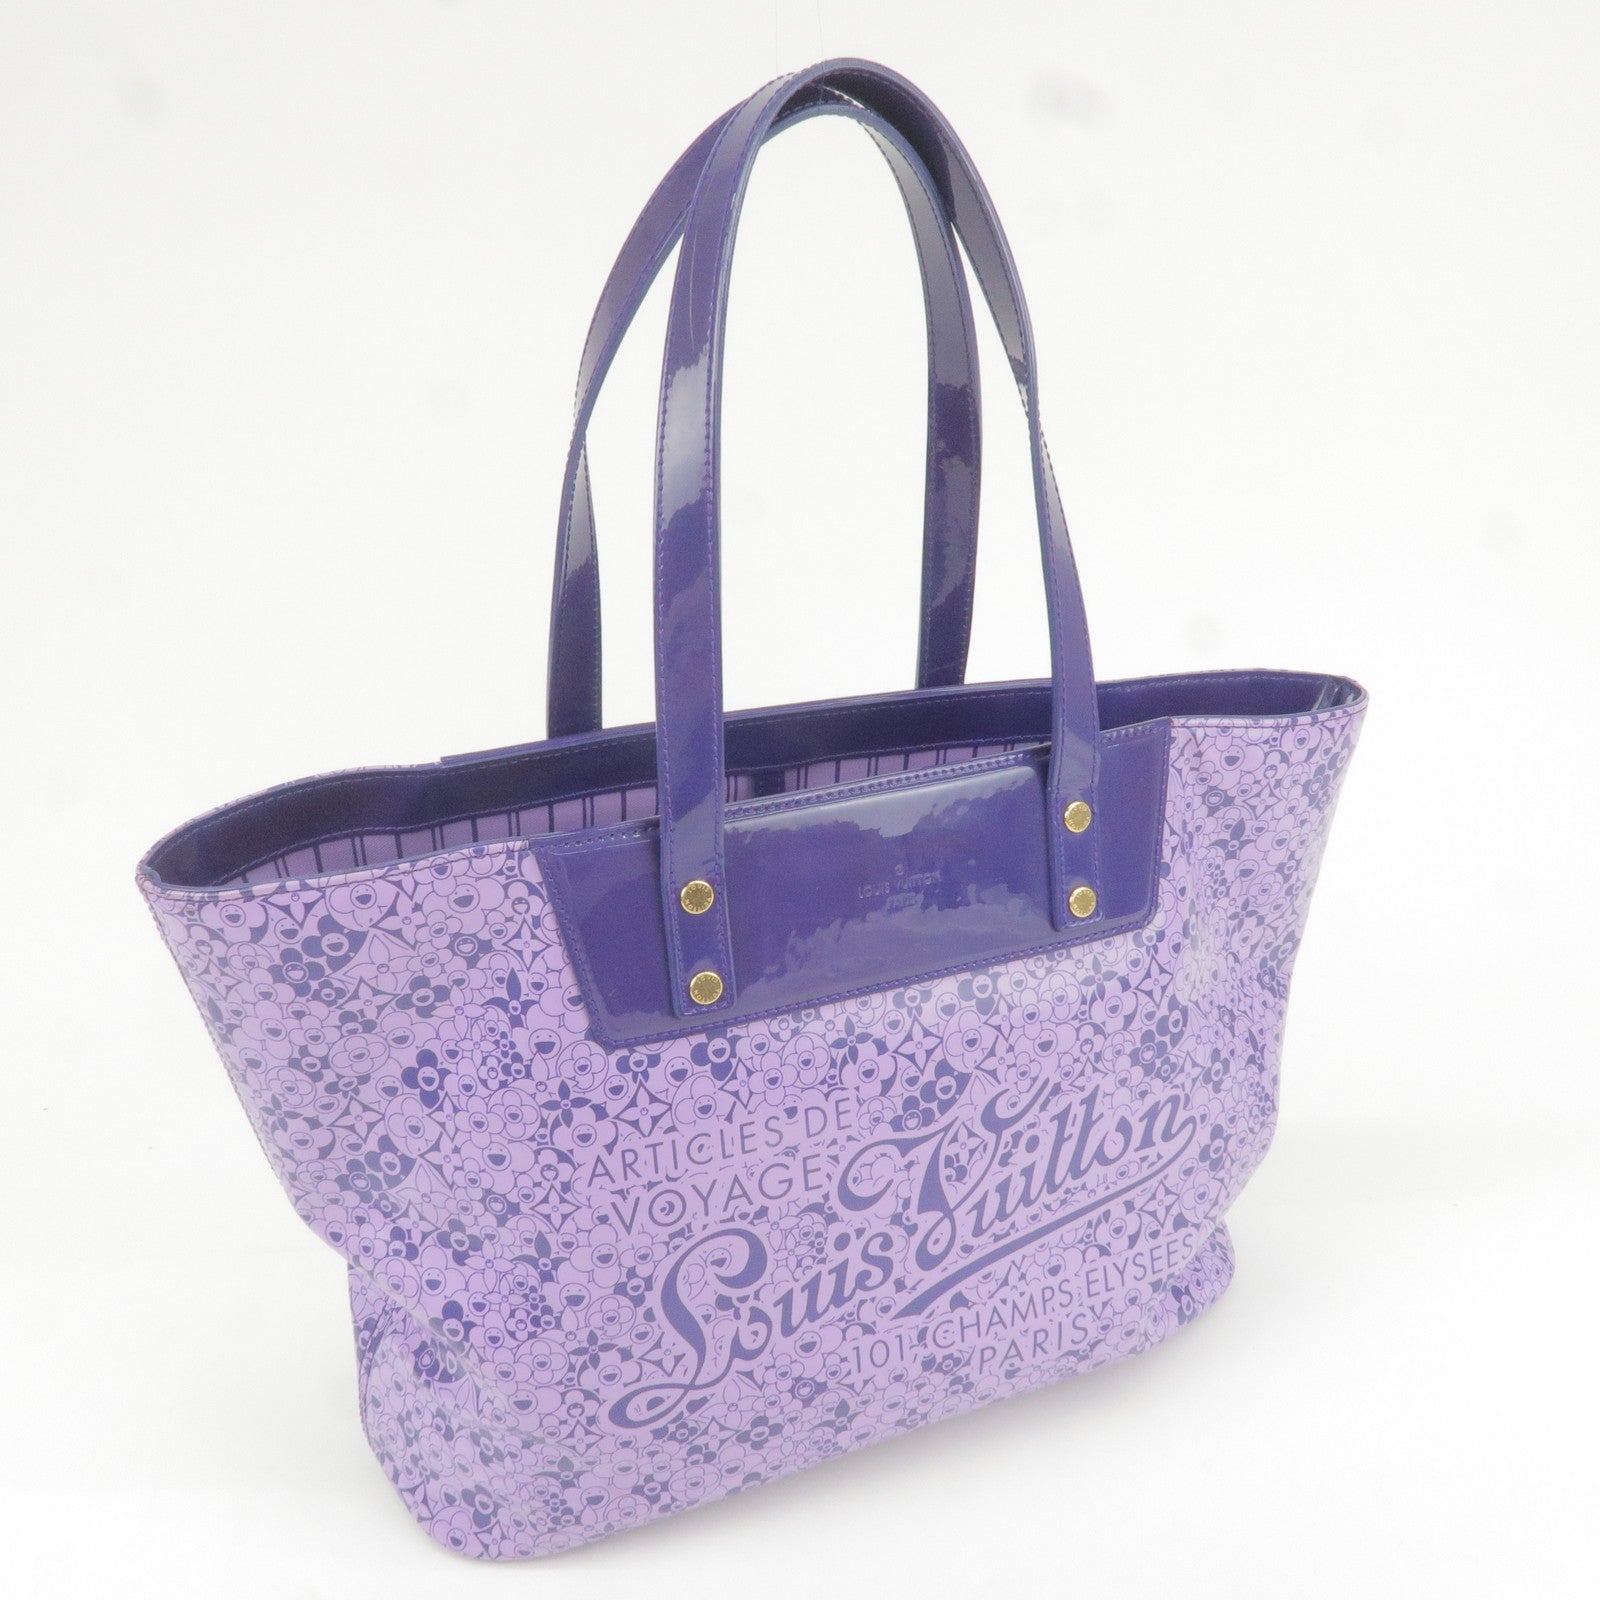 LOUIS VUITTON TOTE COSMIC BLOSSOM BEACH LINE LIMITED EDITION